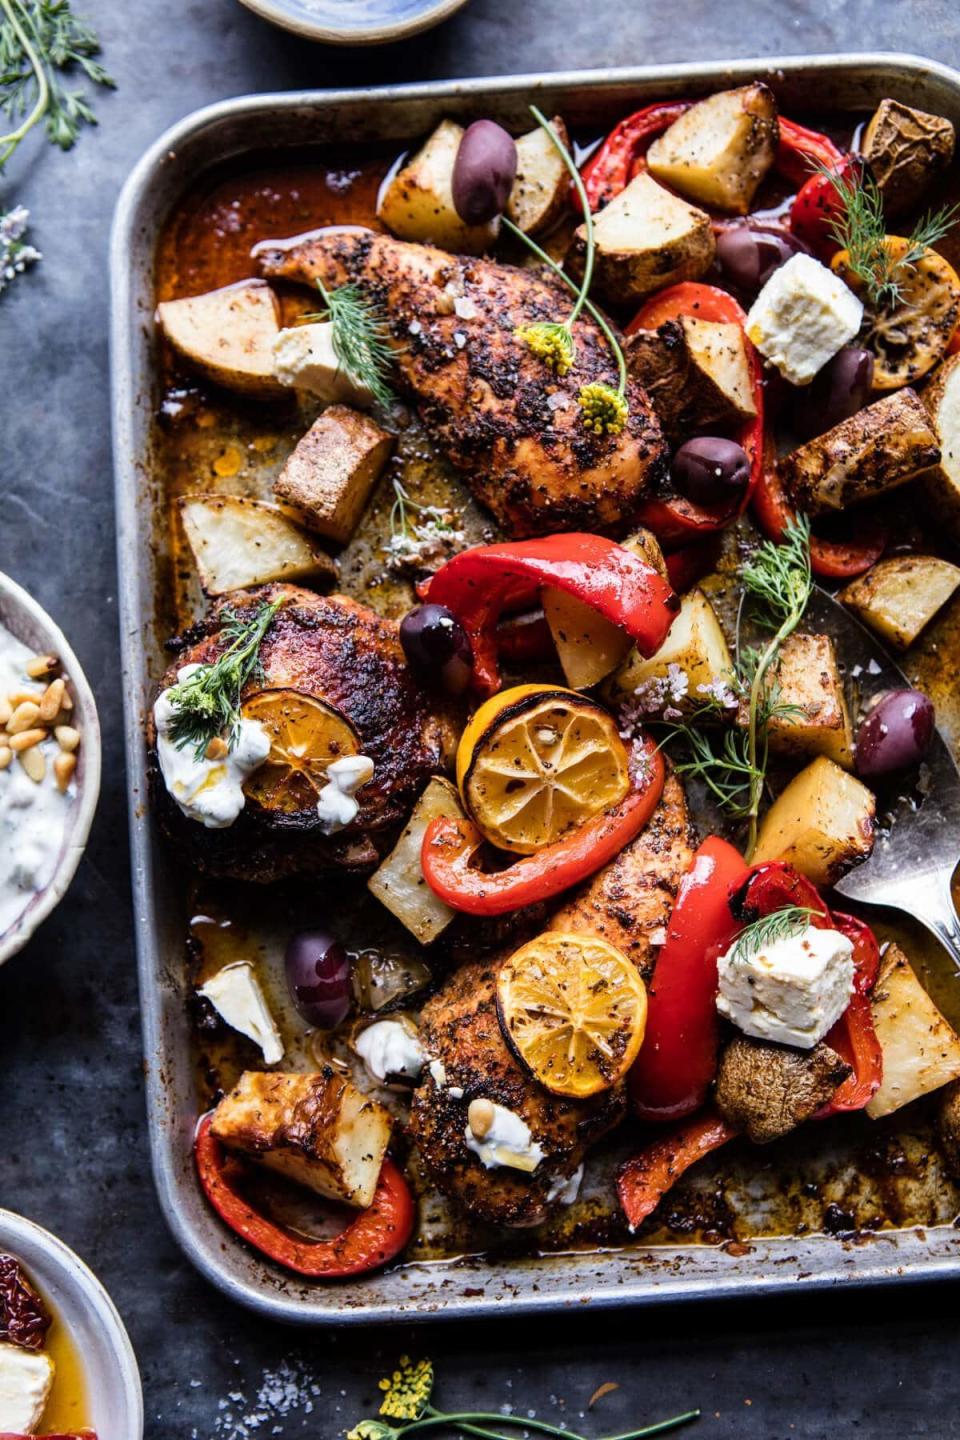 <strong>Get the <a href="https://www.halfbakedharvest.com/best-easy-greek-sheet-pan-chicken-souvlaki-and-potatoes/?highlight=sheet+pan" target="_blank">Best Easy Greek Sheet Pan Chicken Souvlaki</a> recipe from Half Baked Harvest</strong>